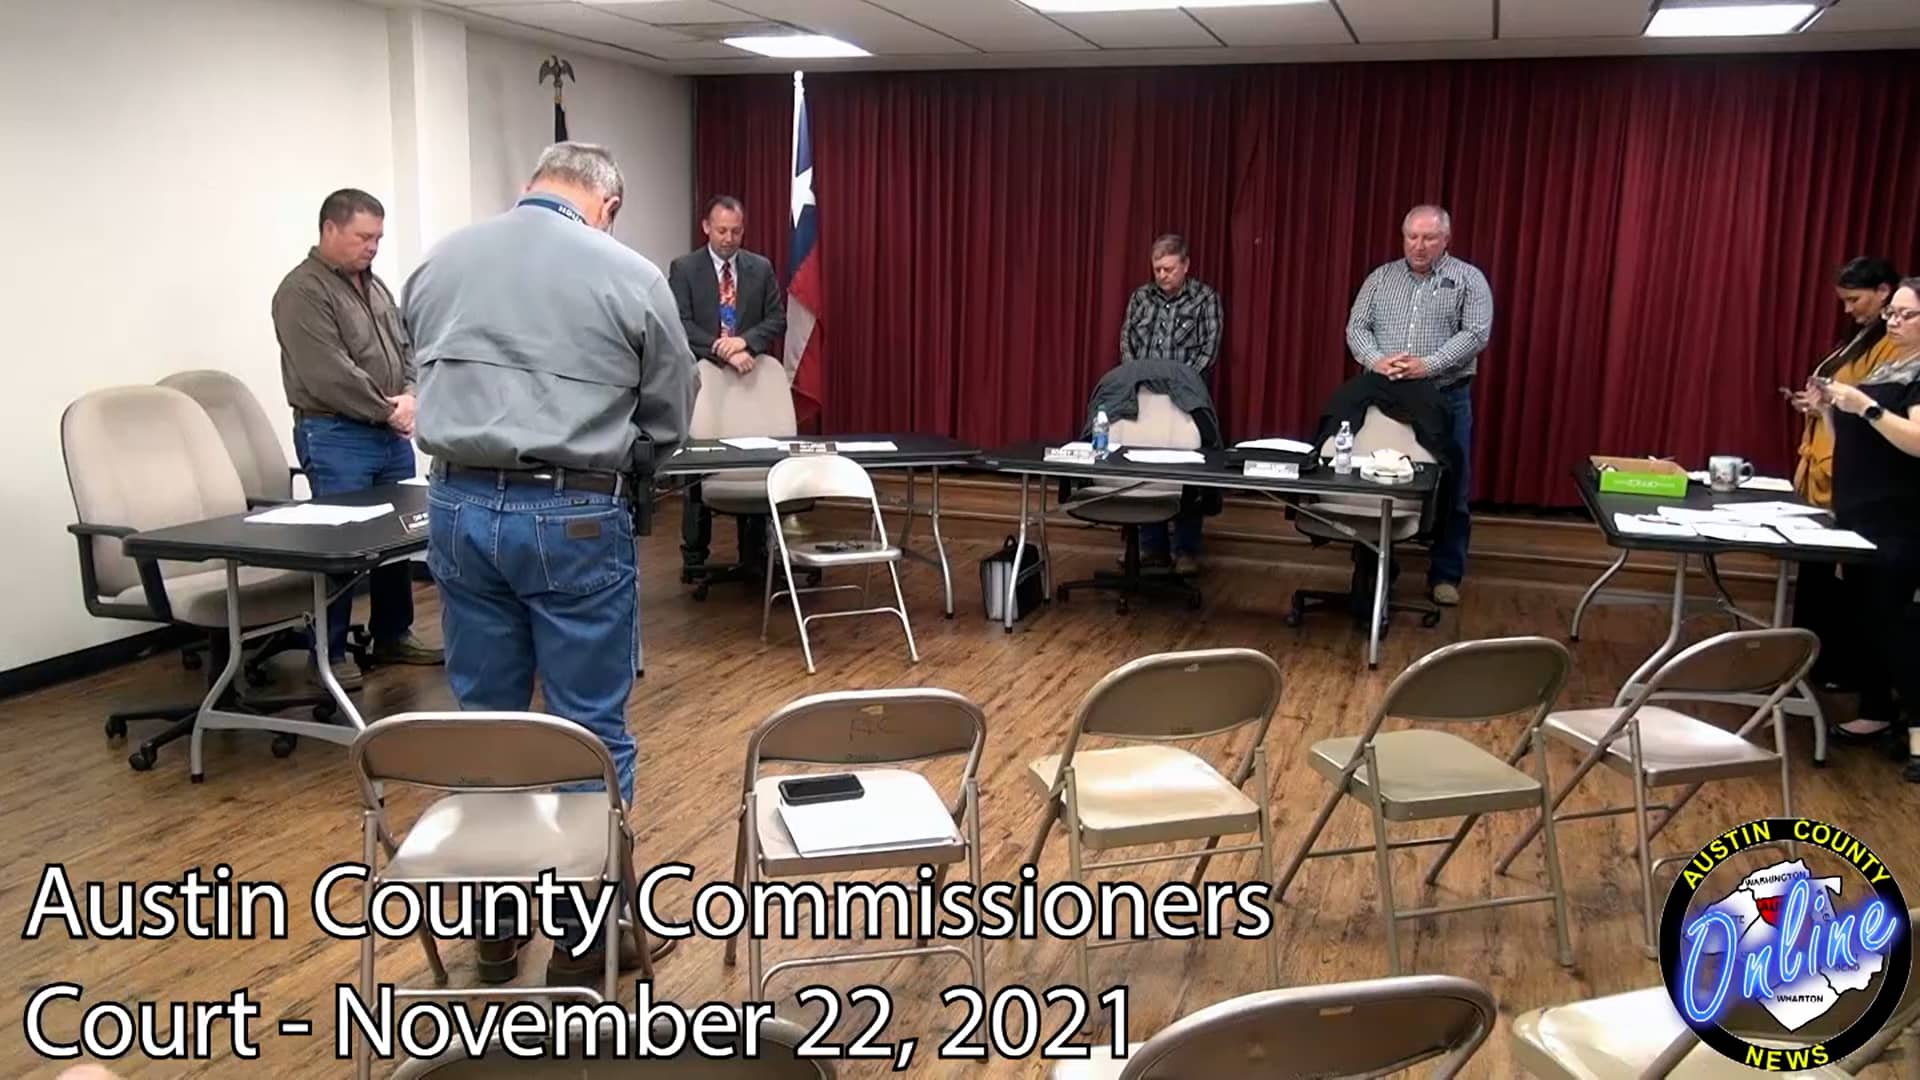 Austin County Commissioners Court November 22 2021 mp4 on Vimeo